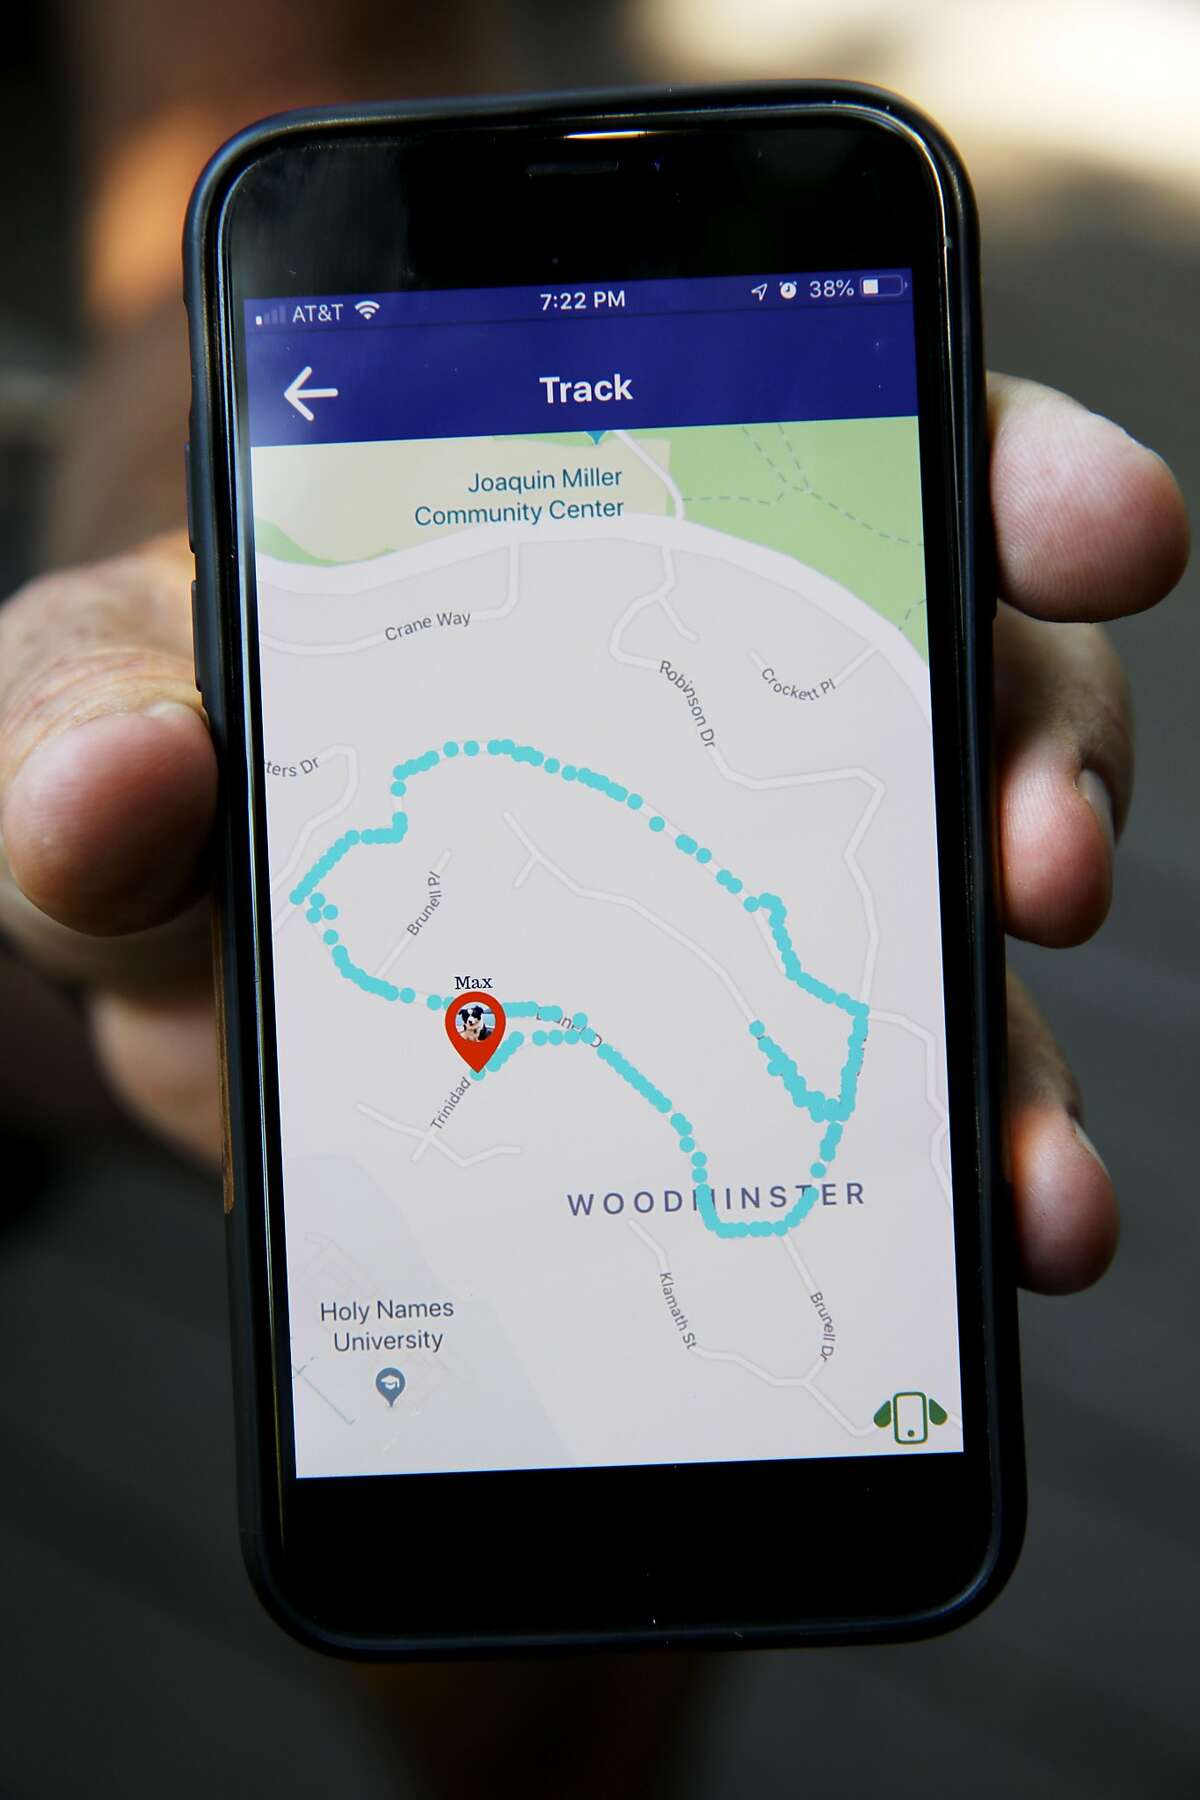 Gregory Gotts shows Max's, his border collie, route on the InvisiLeach app in Oakland, Calif., on Tuesday, June 11, 2019. Gotts has invented InvisiLeash, a small electronic device to attach to a dog or cat collar that allows the owner to track the animal's whereabouts.